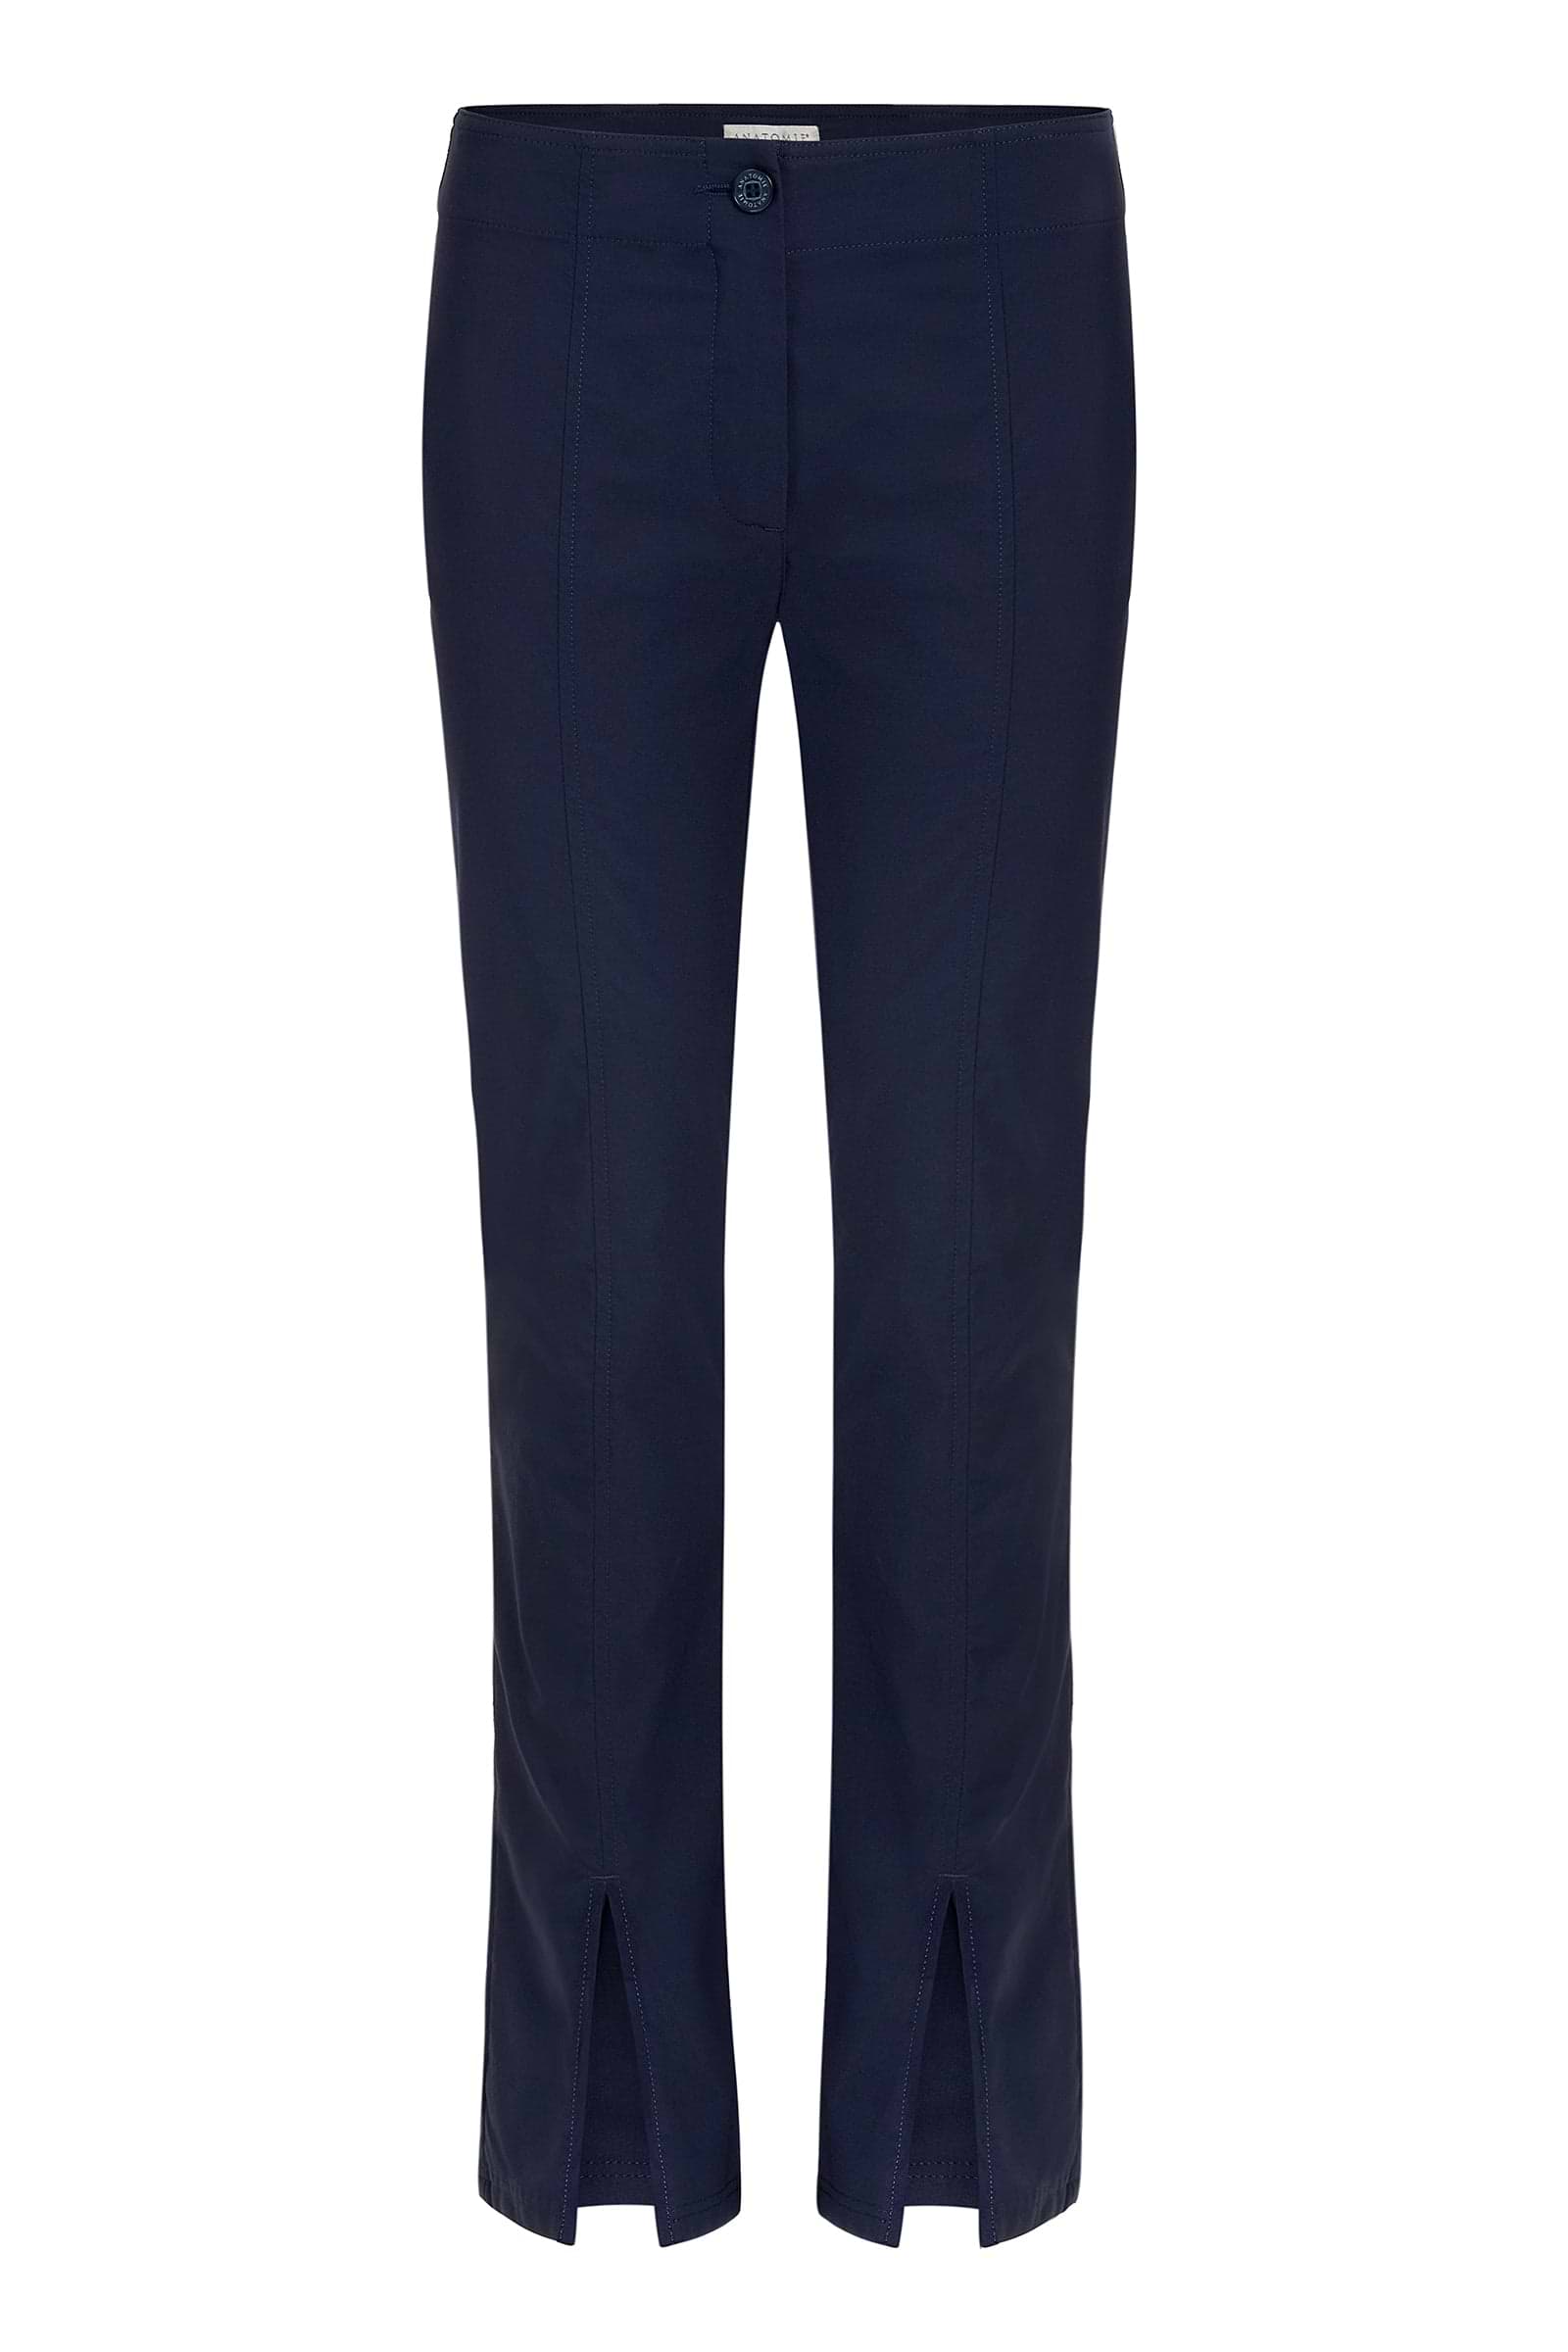 Dominica High Rise Pant